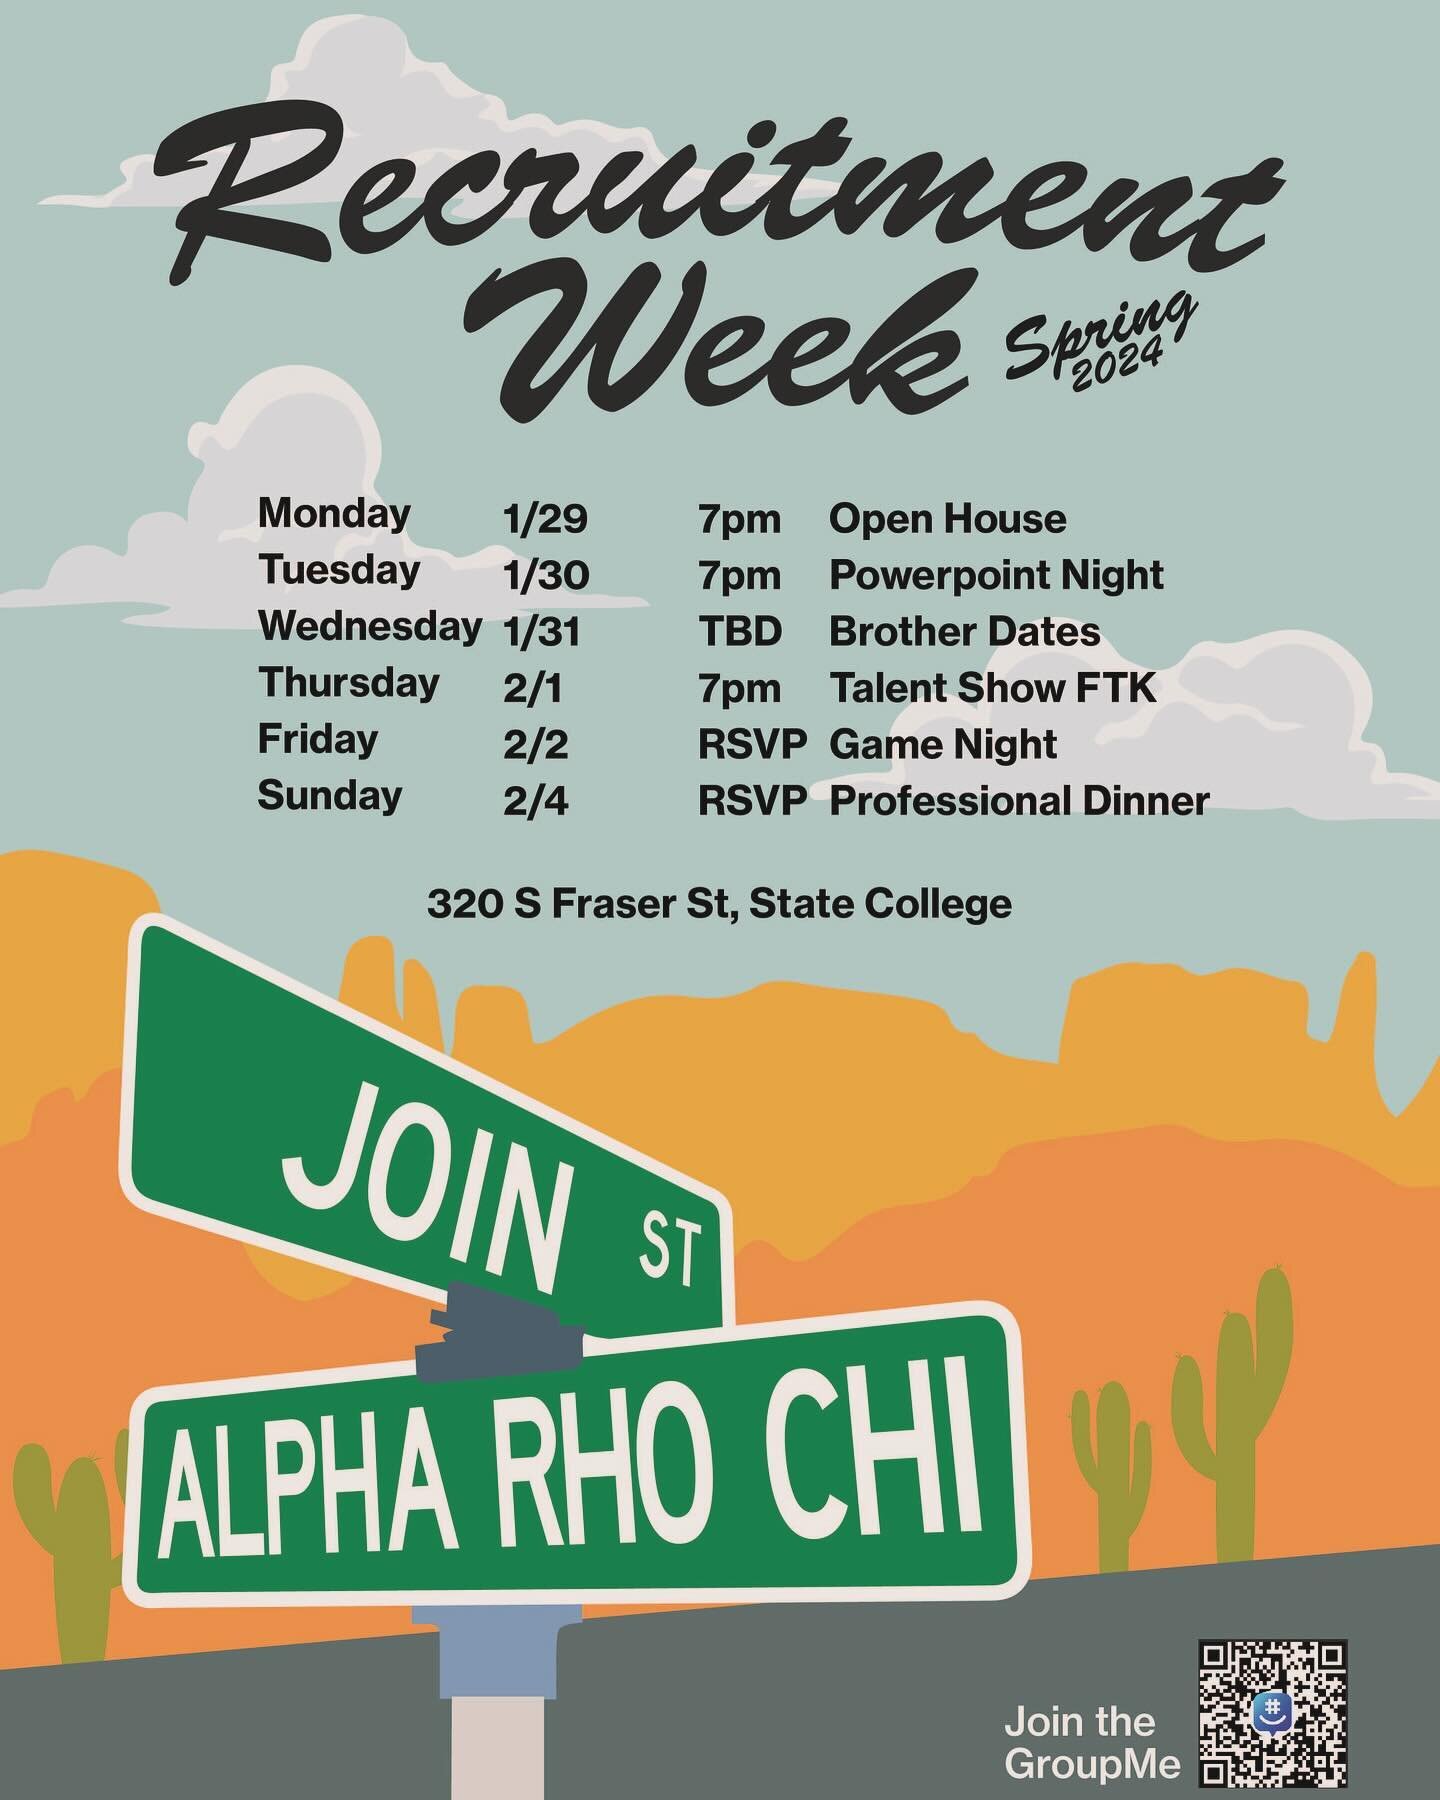 Recruitment week is right around the corner! Save the dates, get hype, and get ready! DM us with any questions or concerns and be sure to join the GroupMe for all the recruitment week updates!